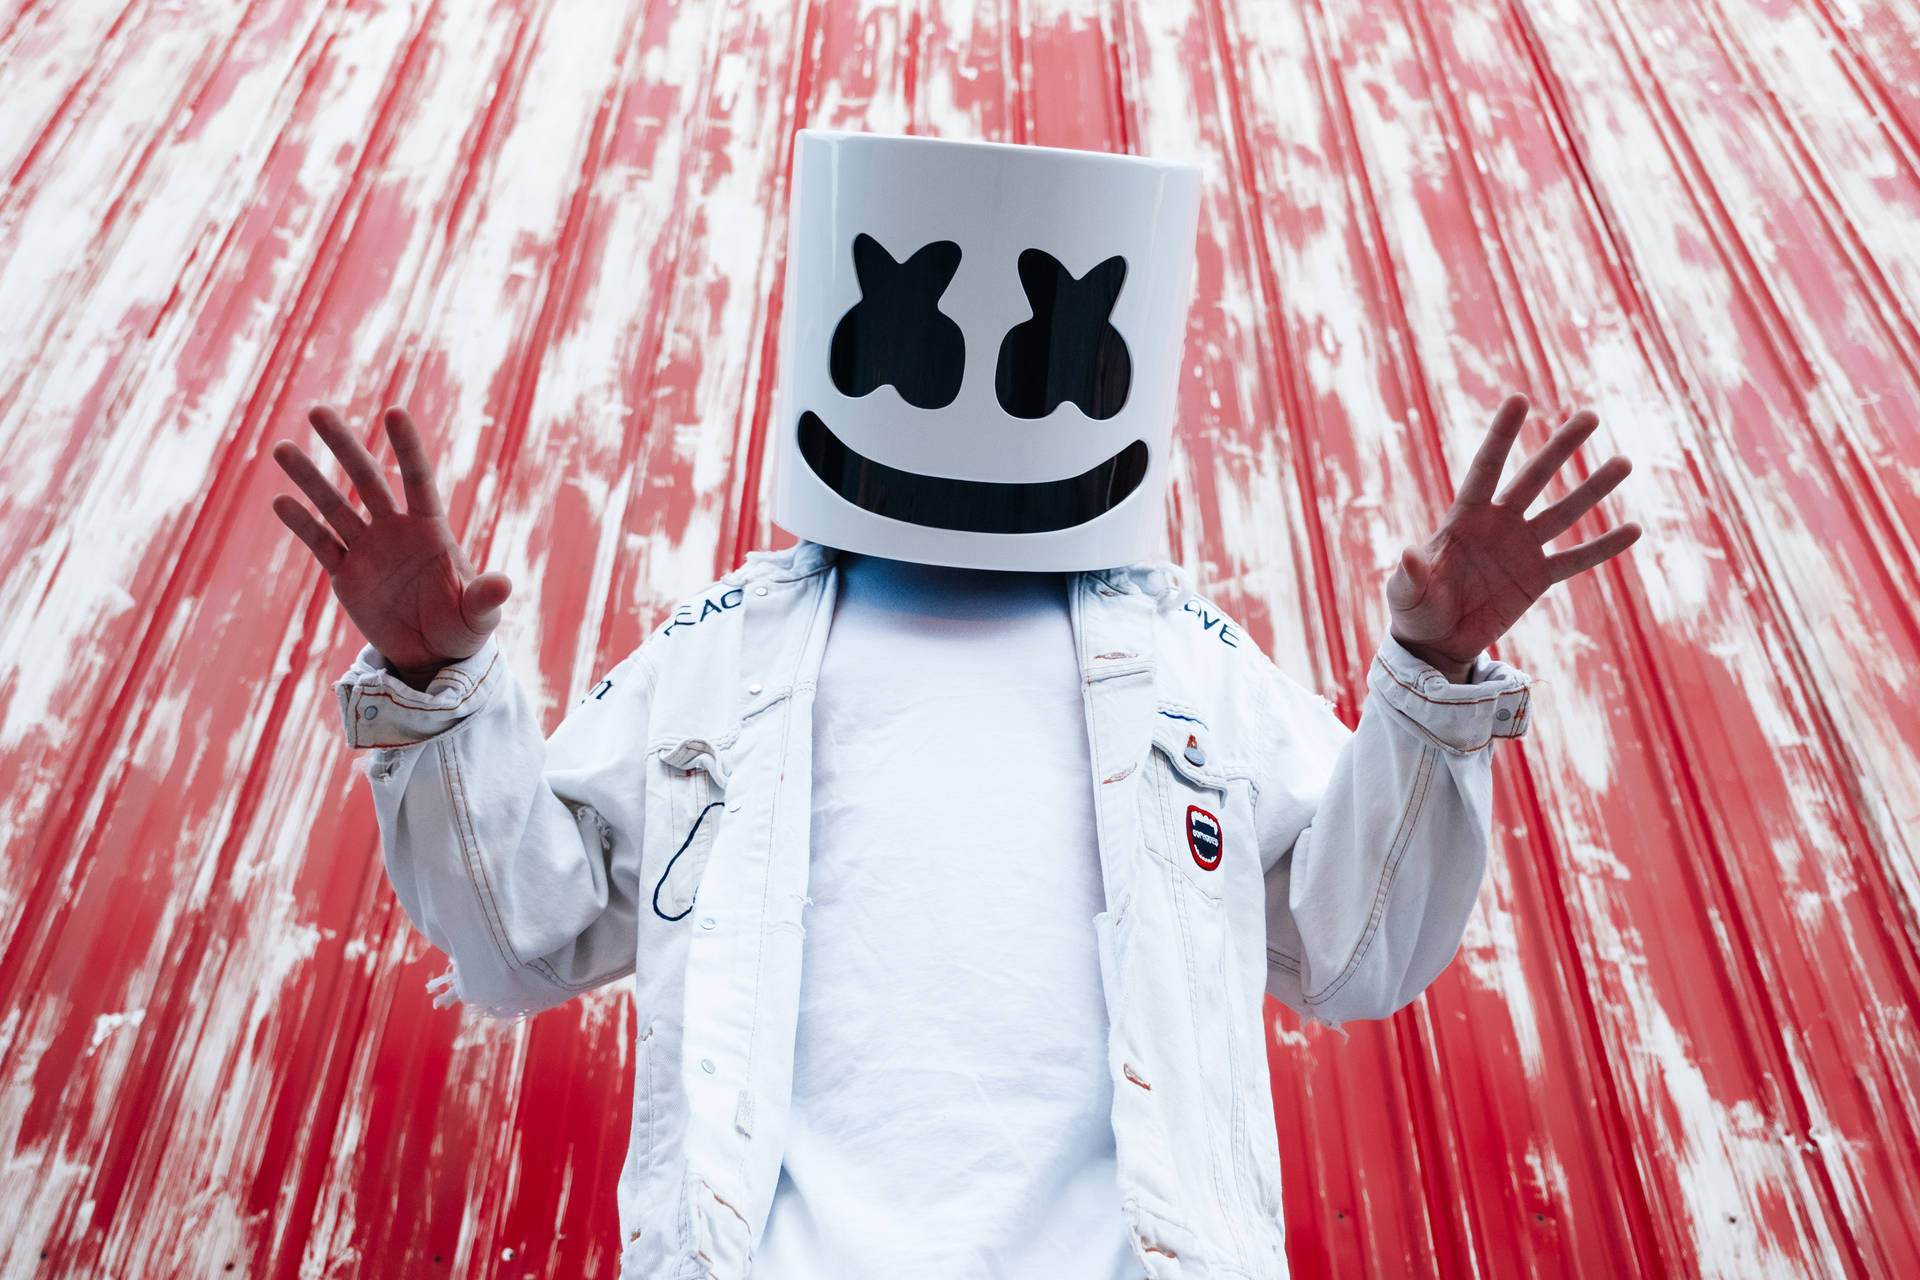 Rödmarshmello 4k (this Is A Direct Translation, But In Swedish We Would Typically Write 